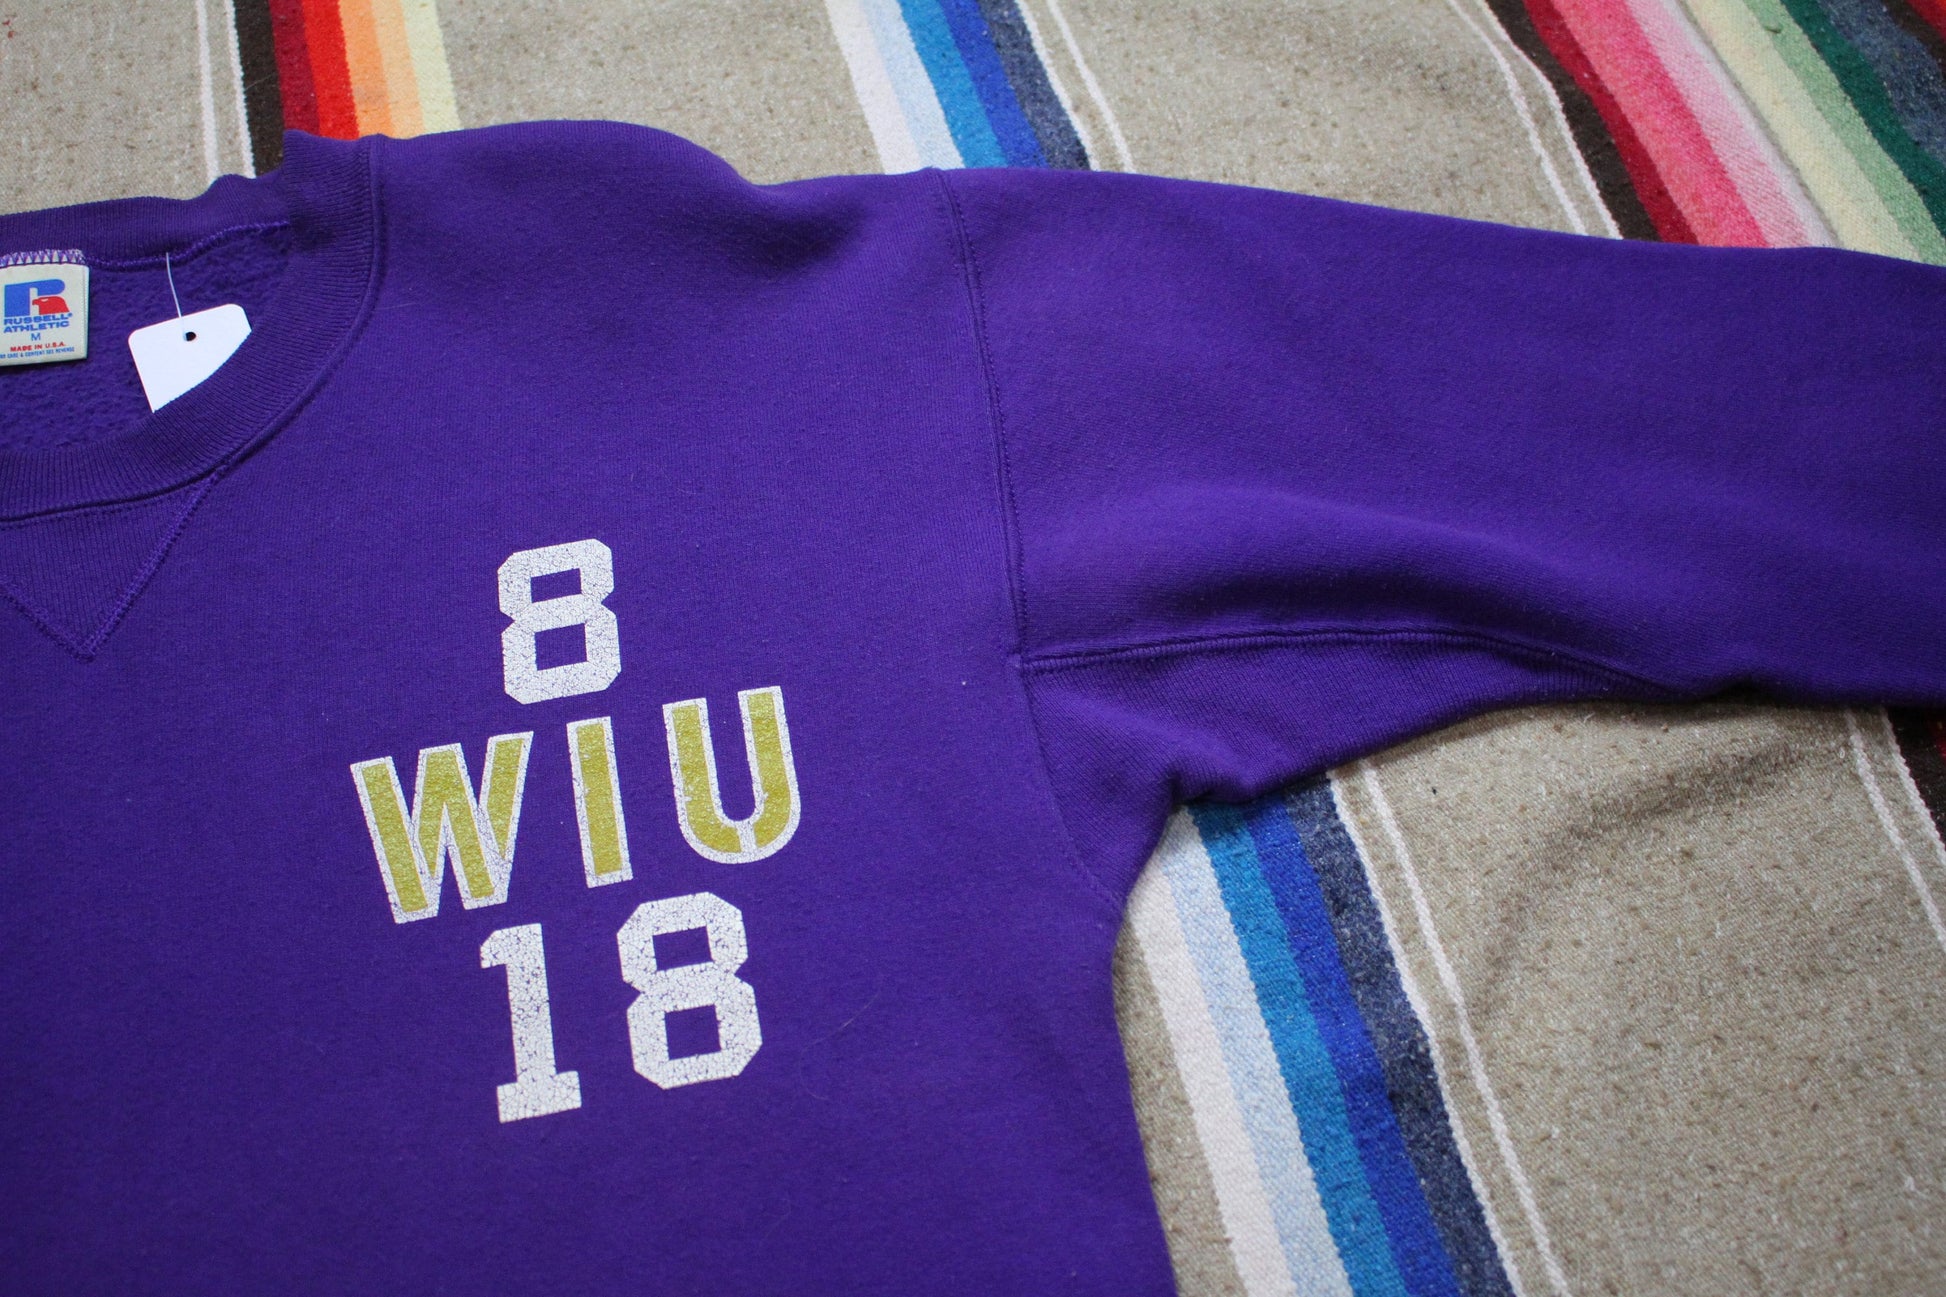 1980s/1990s Russell Athletic Western Illinois University Sweatshirt Made in USA Size M/L